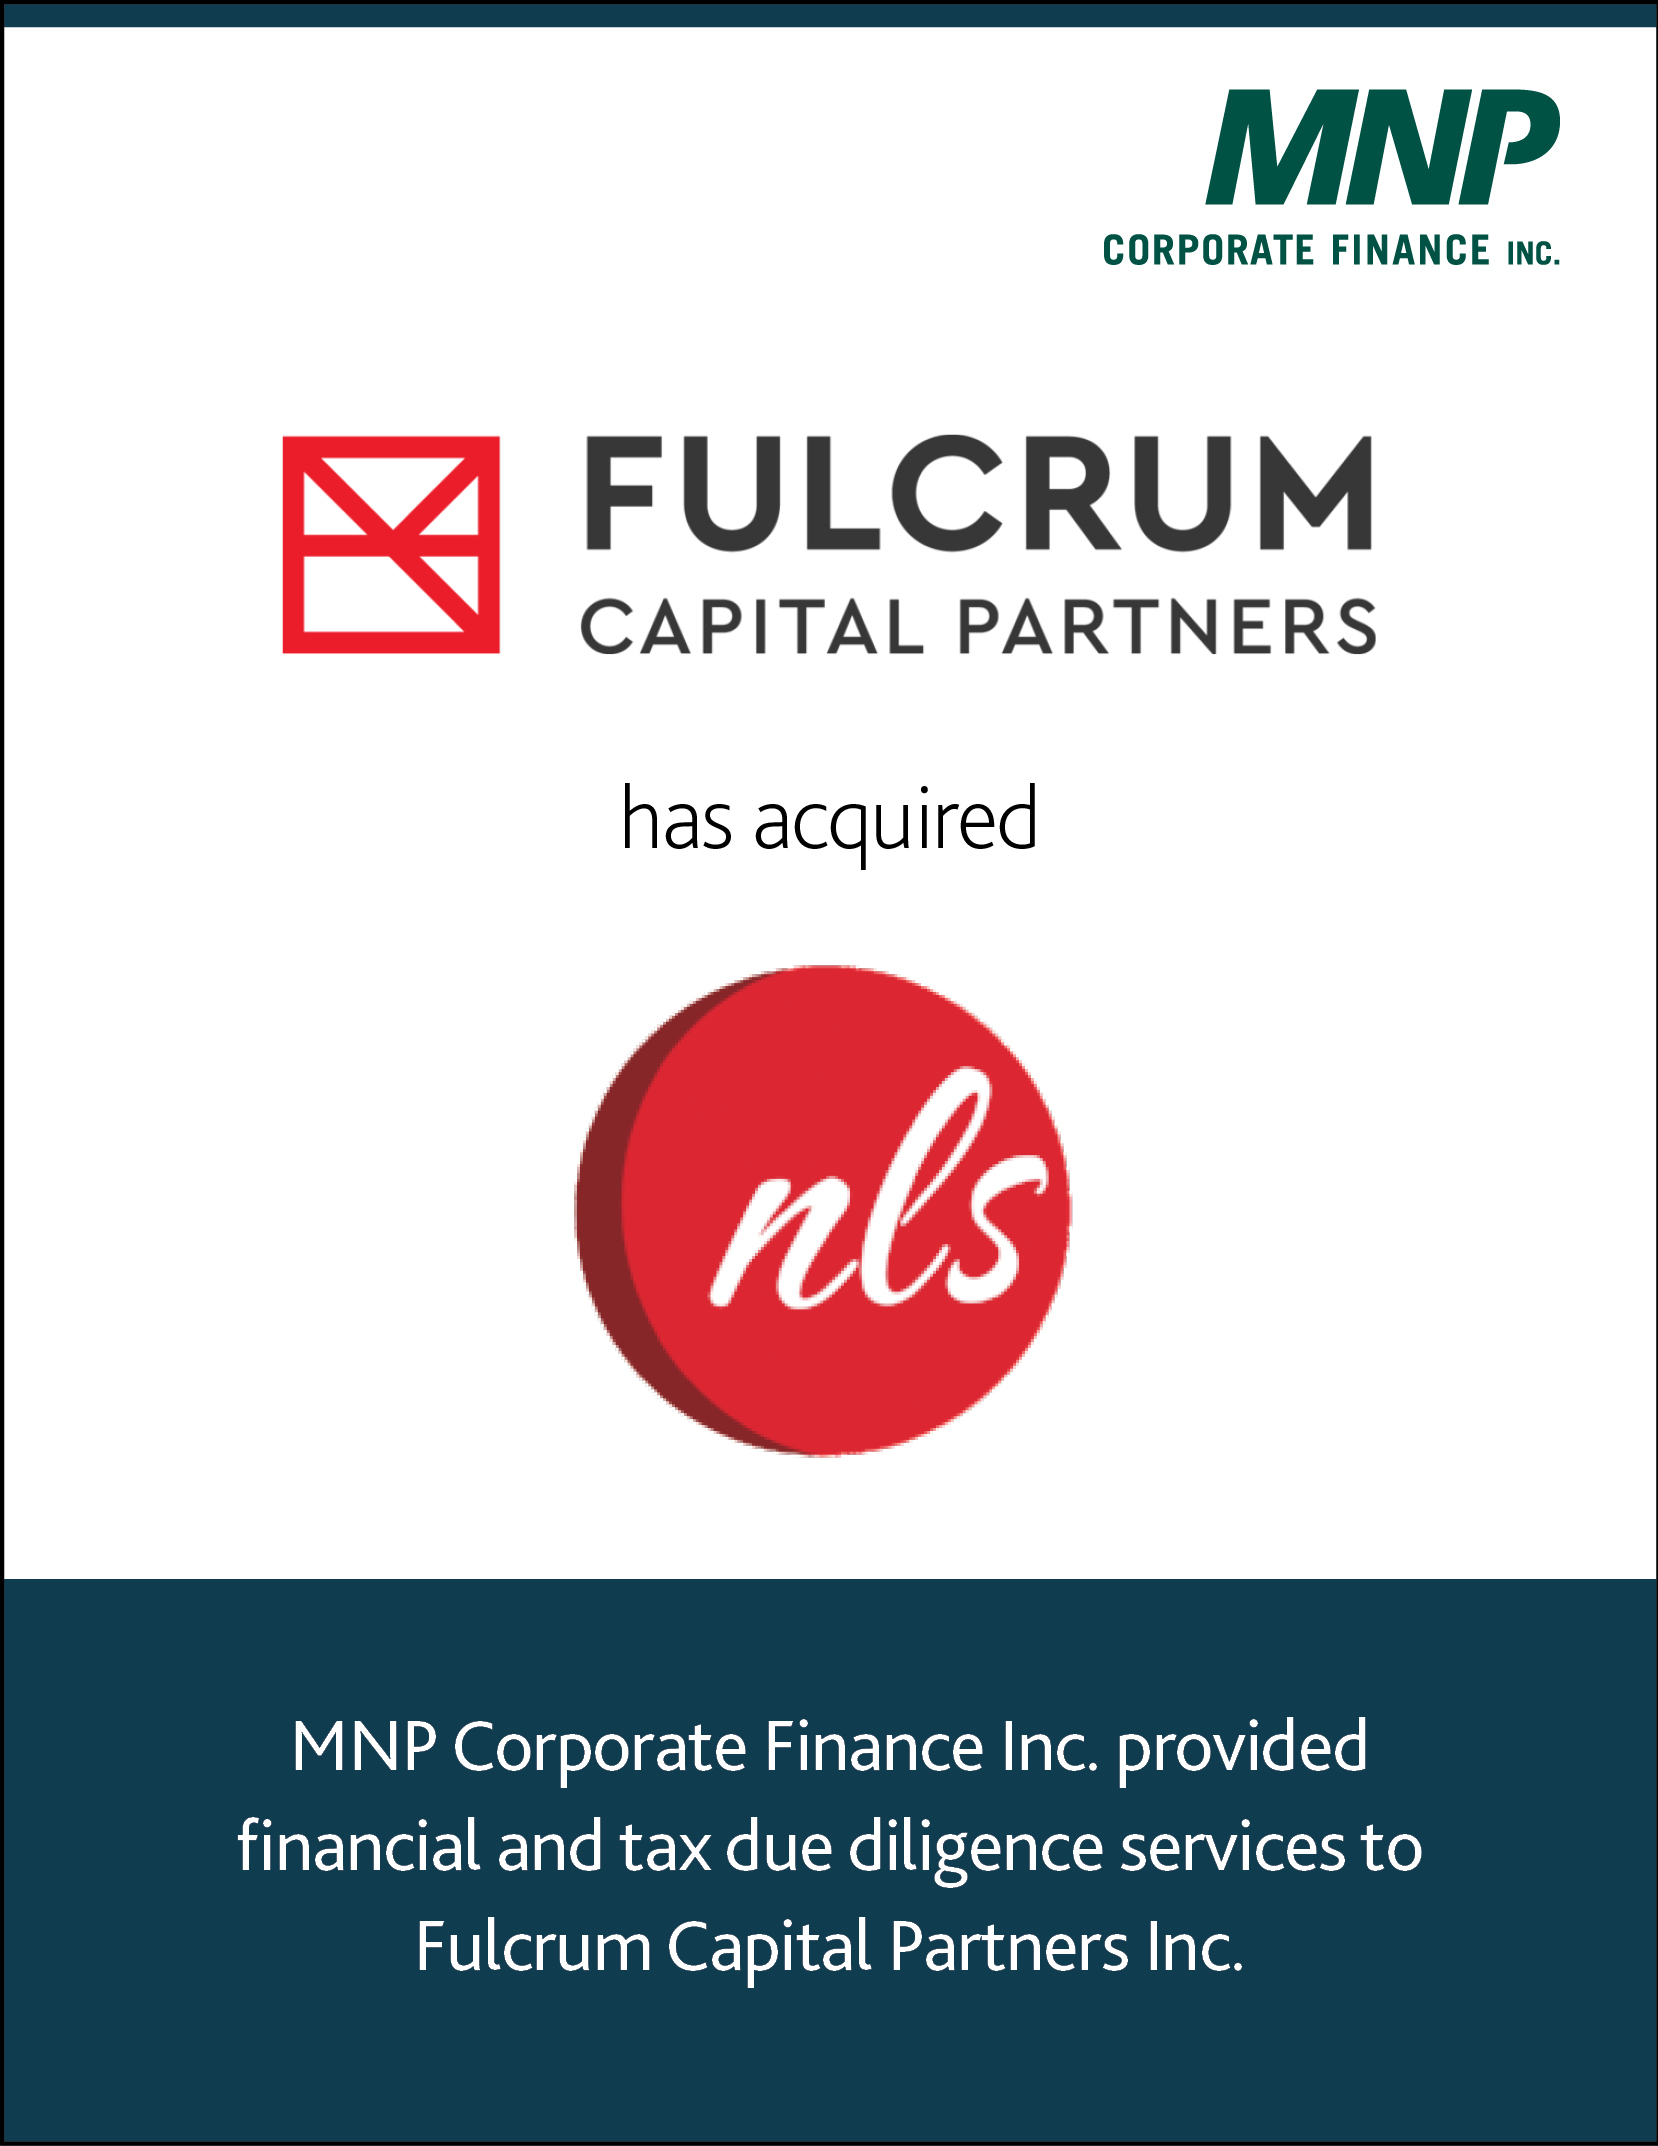 Fulcrum Capital Partners Inc. has acquired National Logistics Services (NLS).